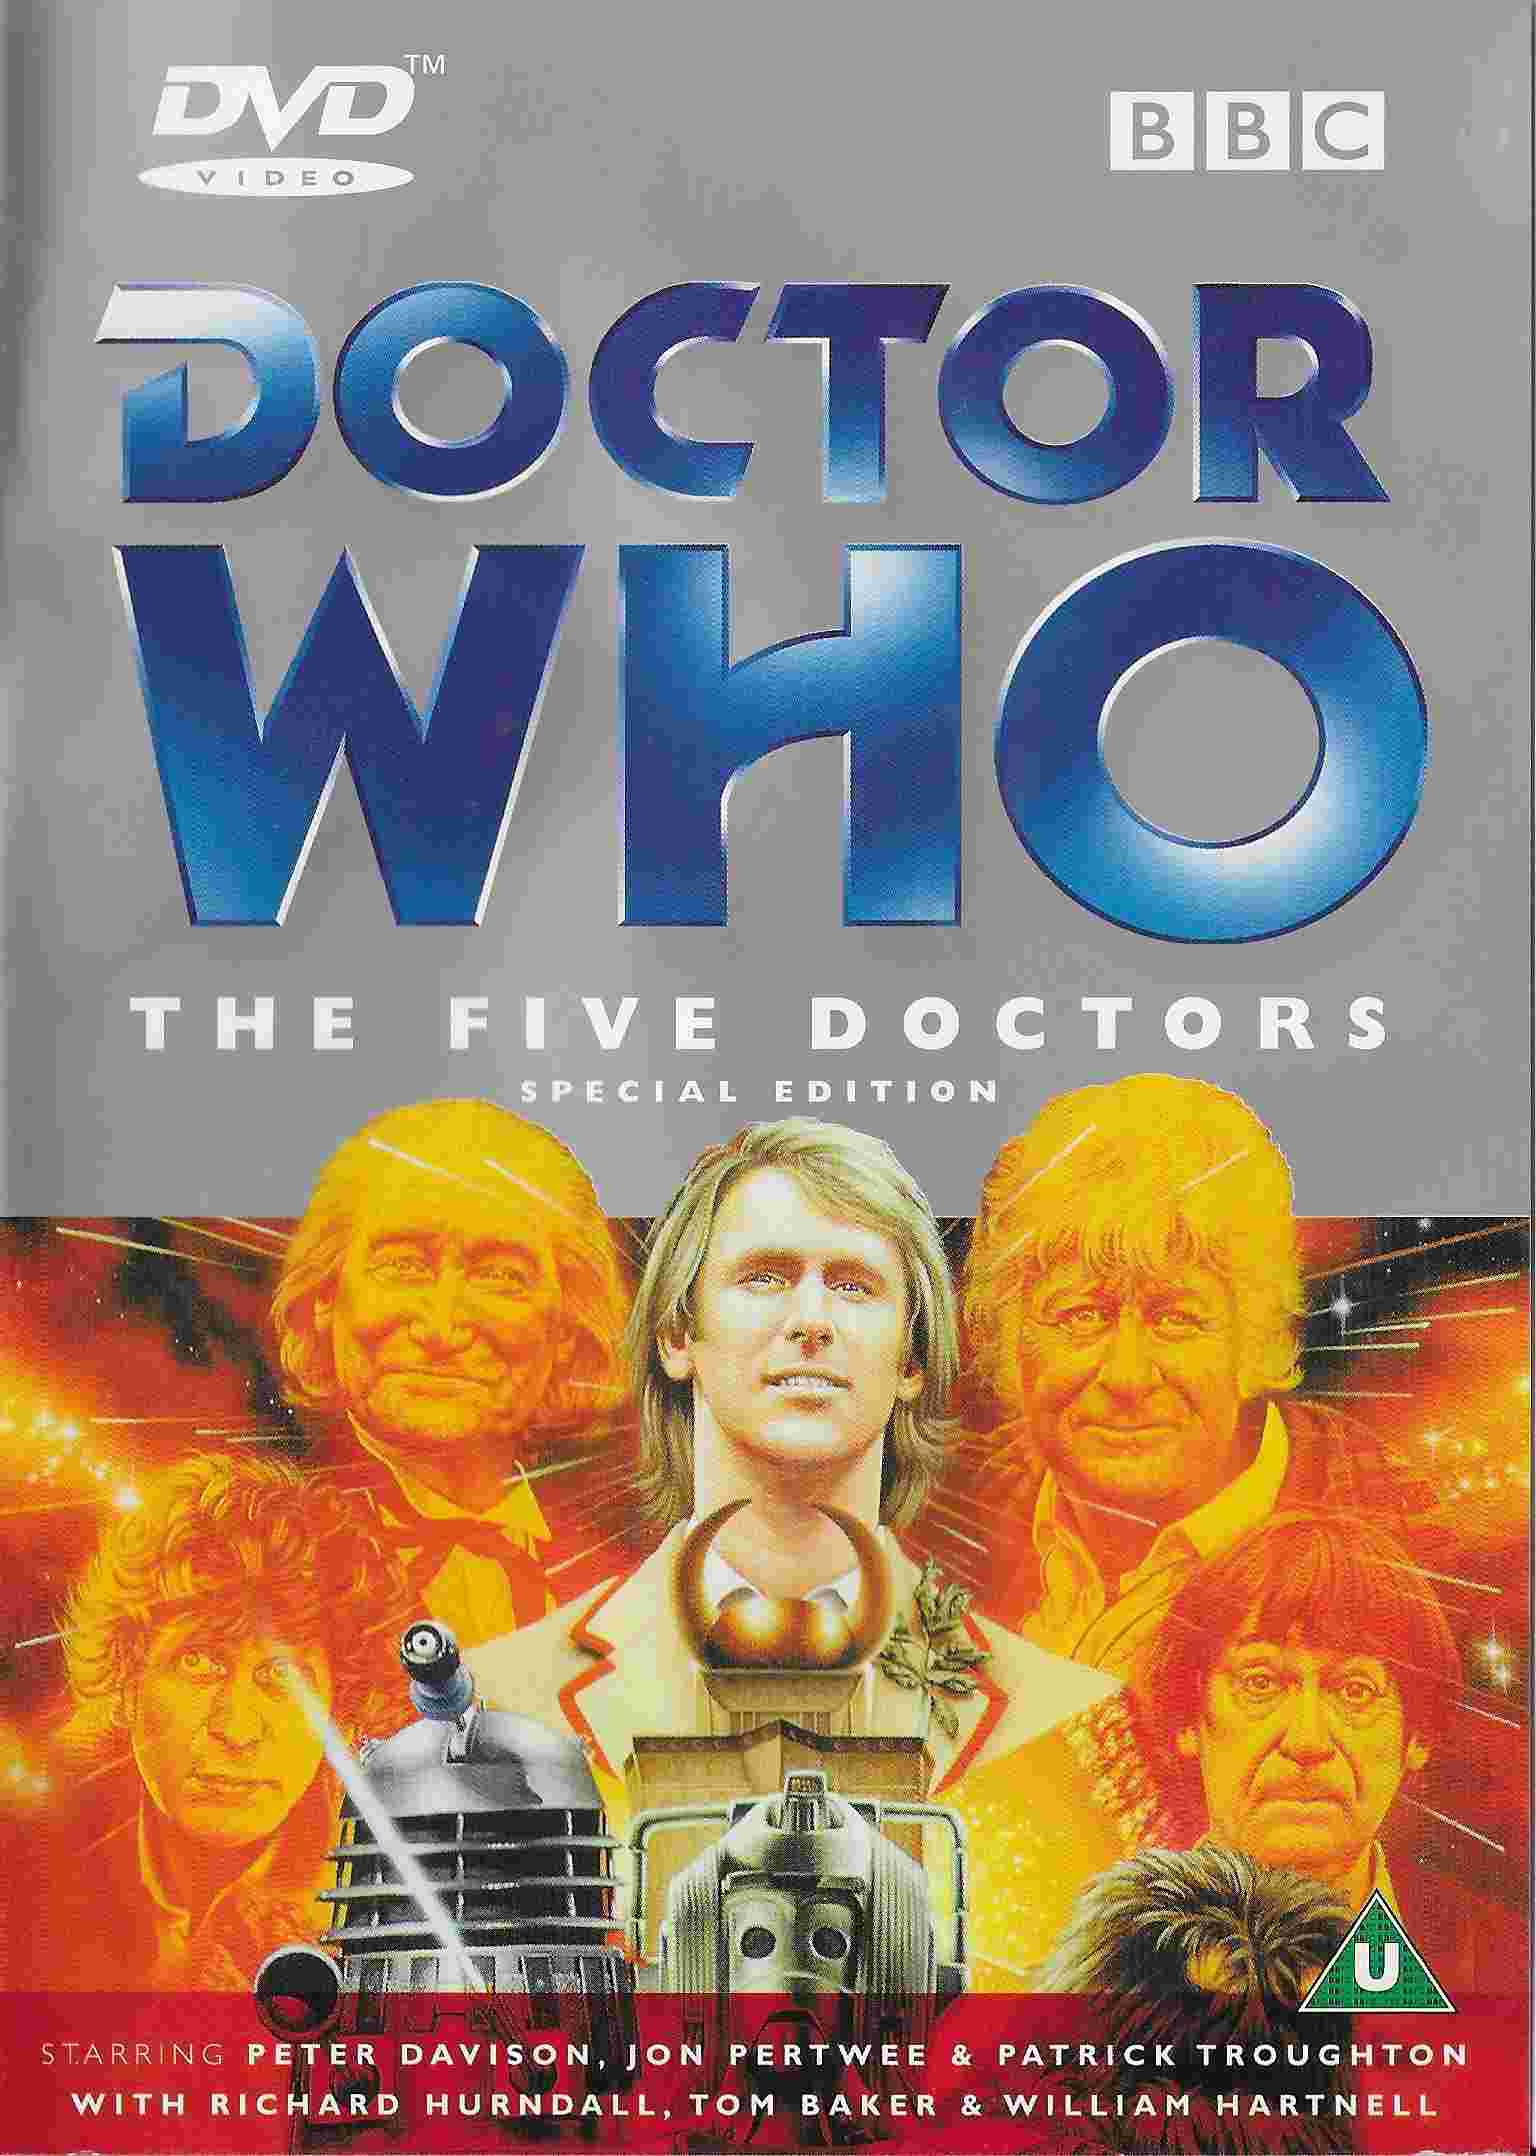 Picture of BBCDVD 1006 Doctor Who - The five Doctors (Autographed) by artist Terrance Dicks from the BBC dvds - Records and Tapes library